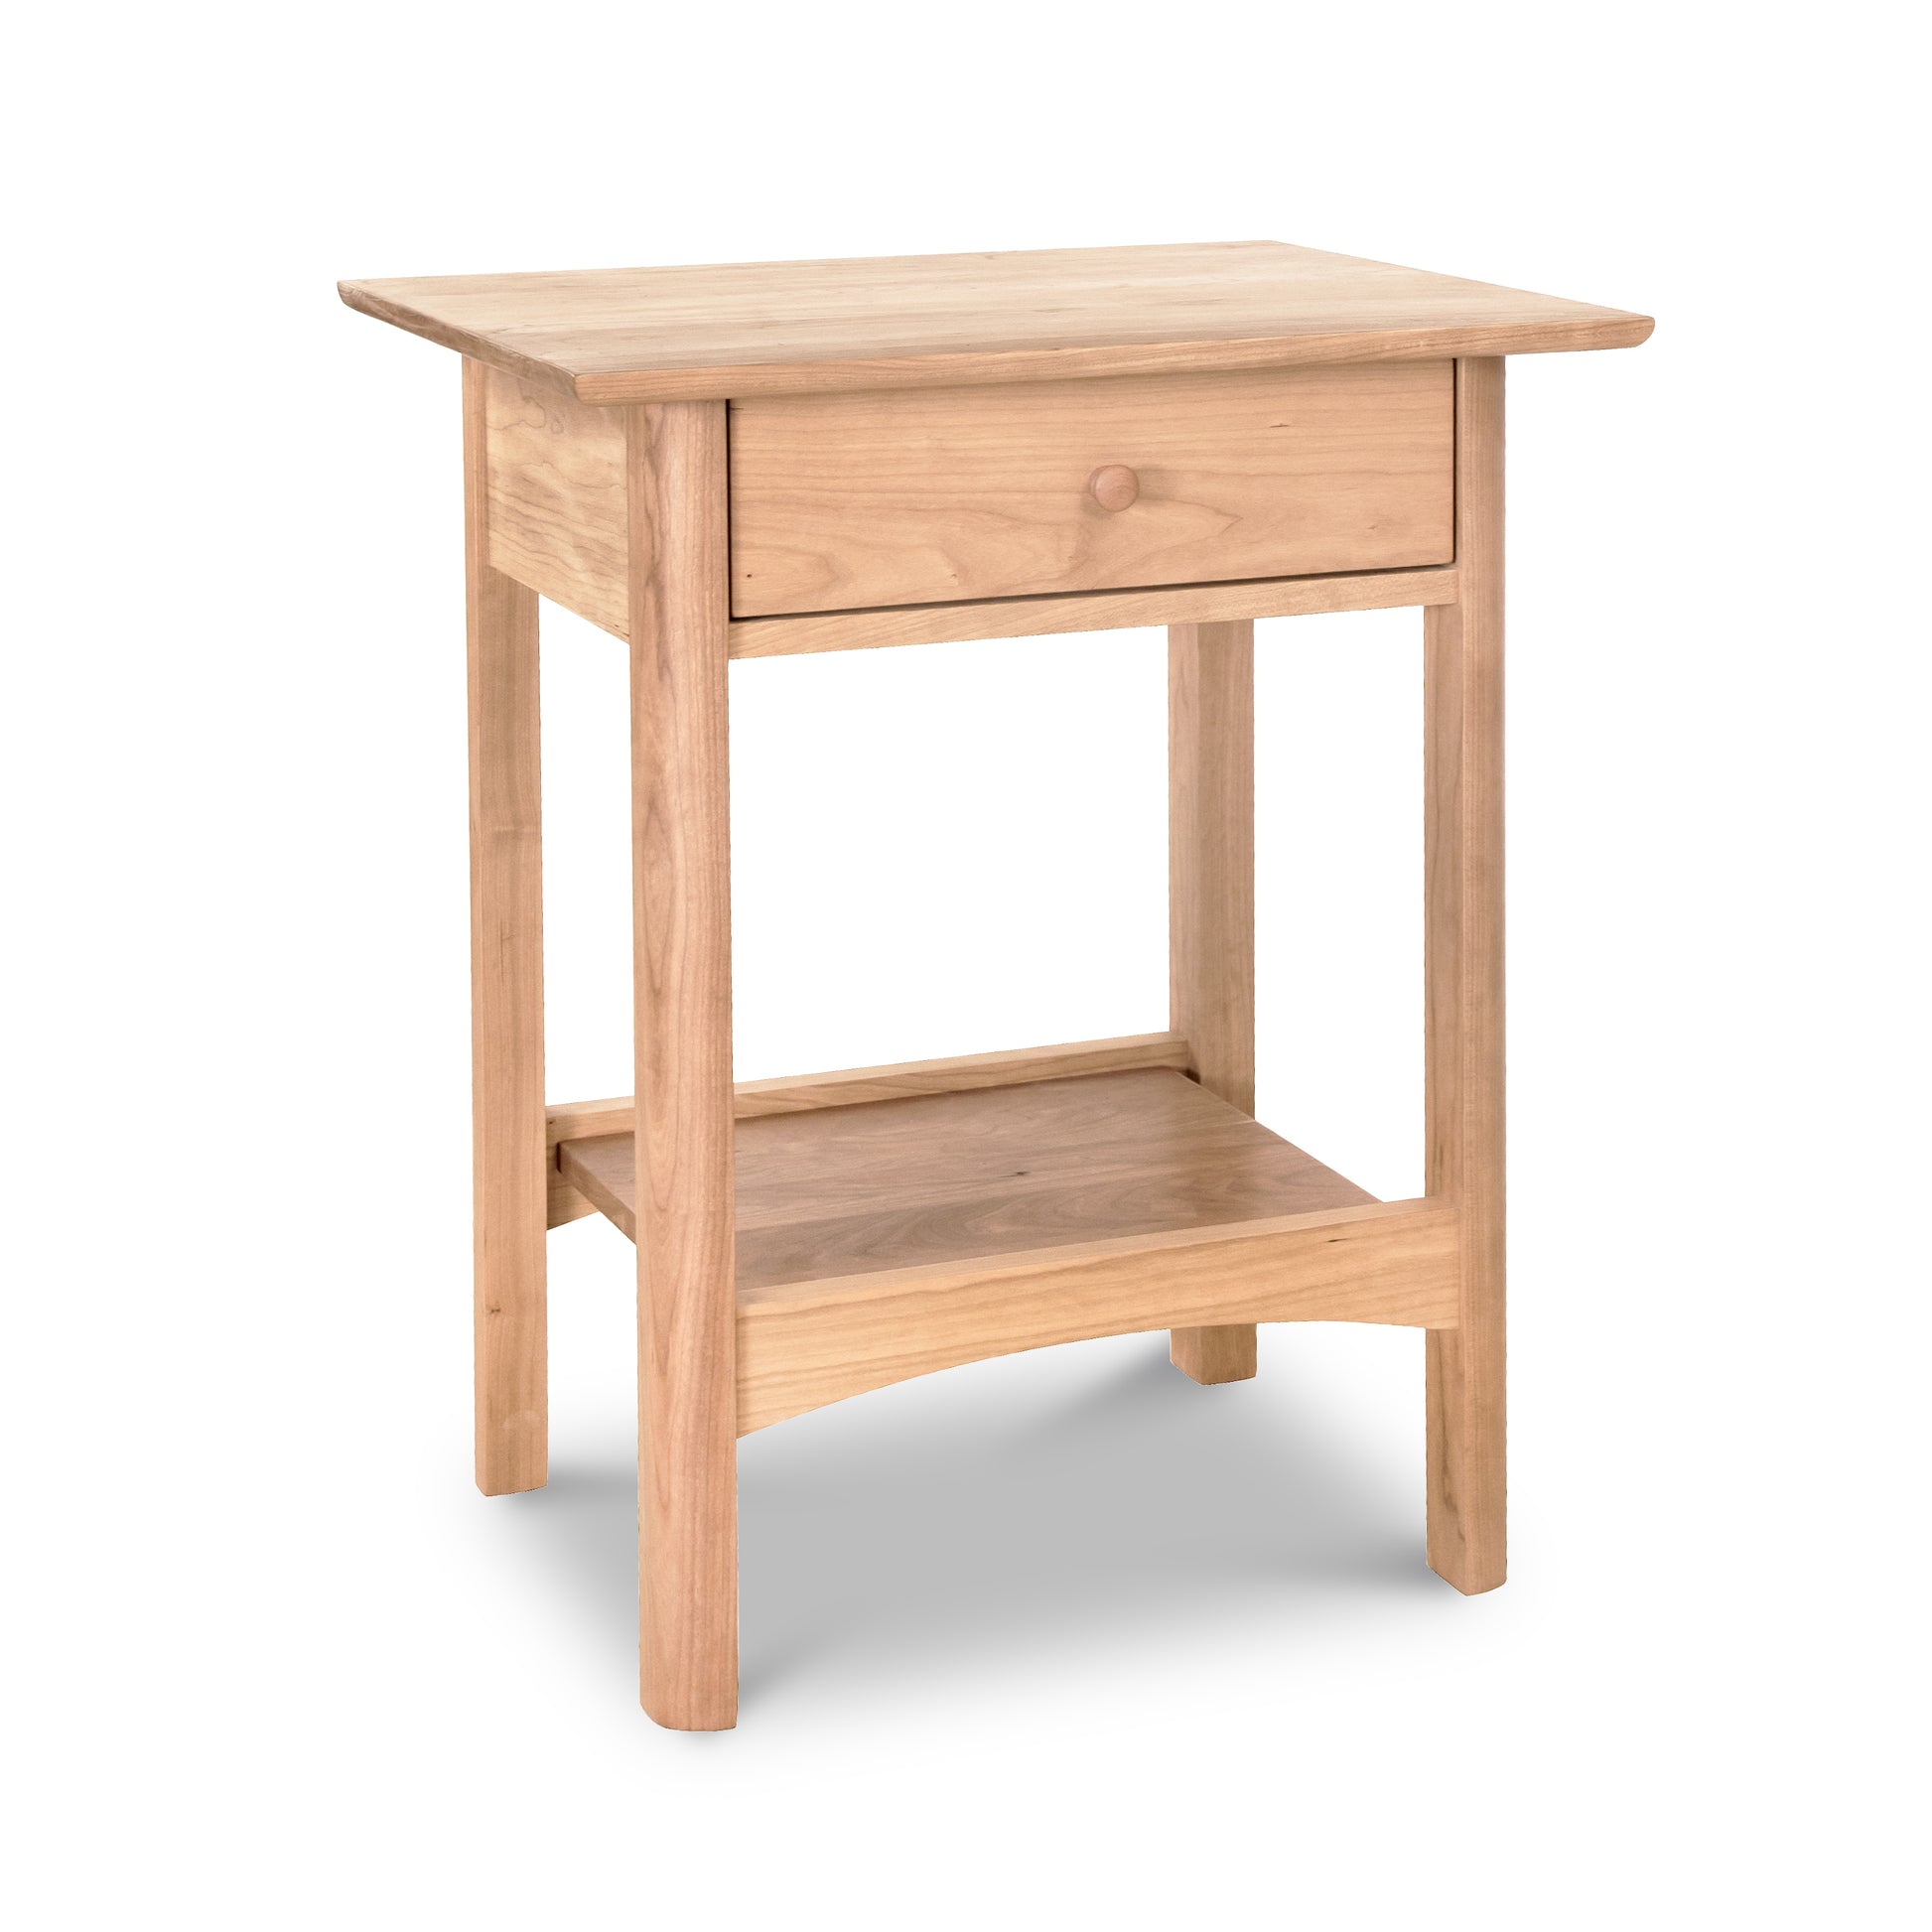 A Heartwood Shaker 1-Drawer Open Shelf Nightstand from Vermont Furniture Designs.